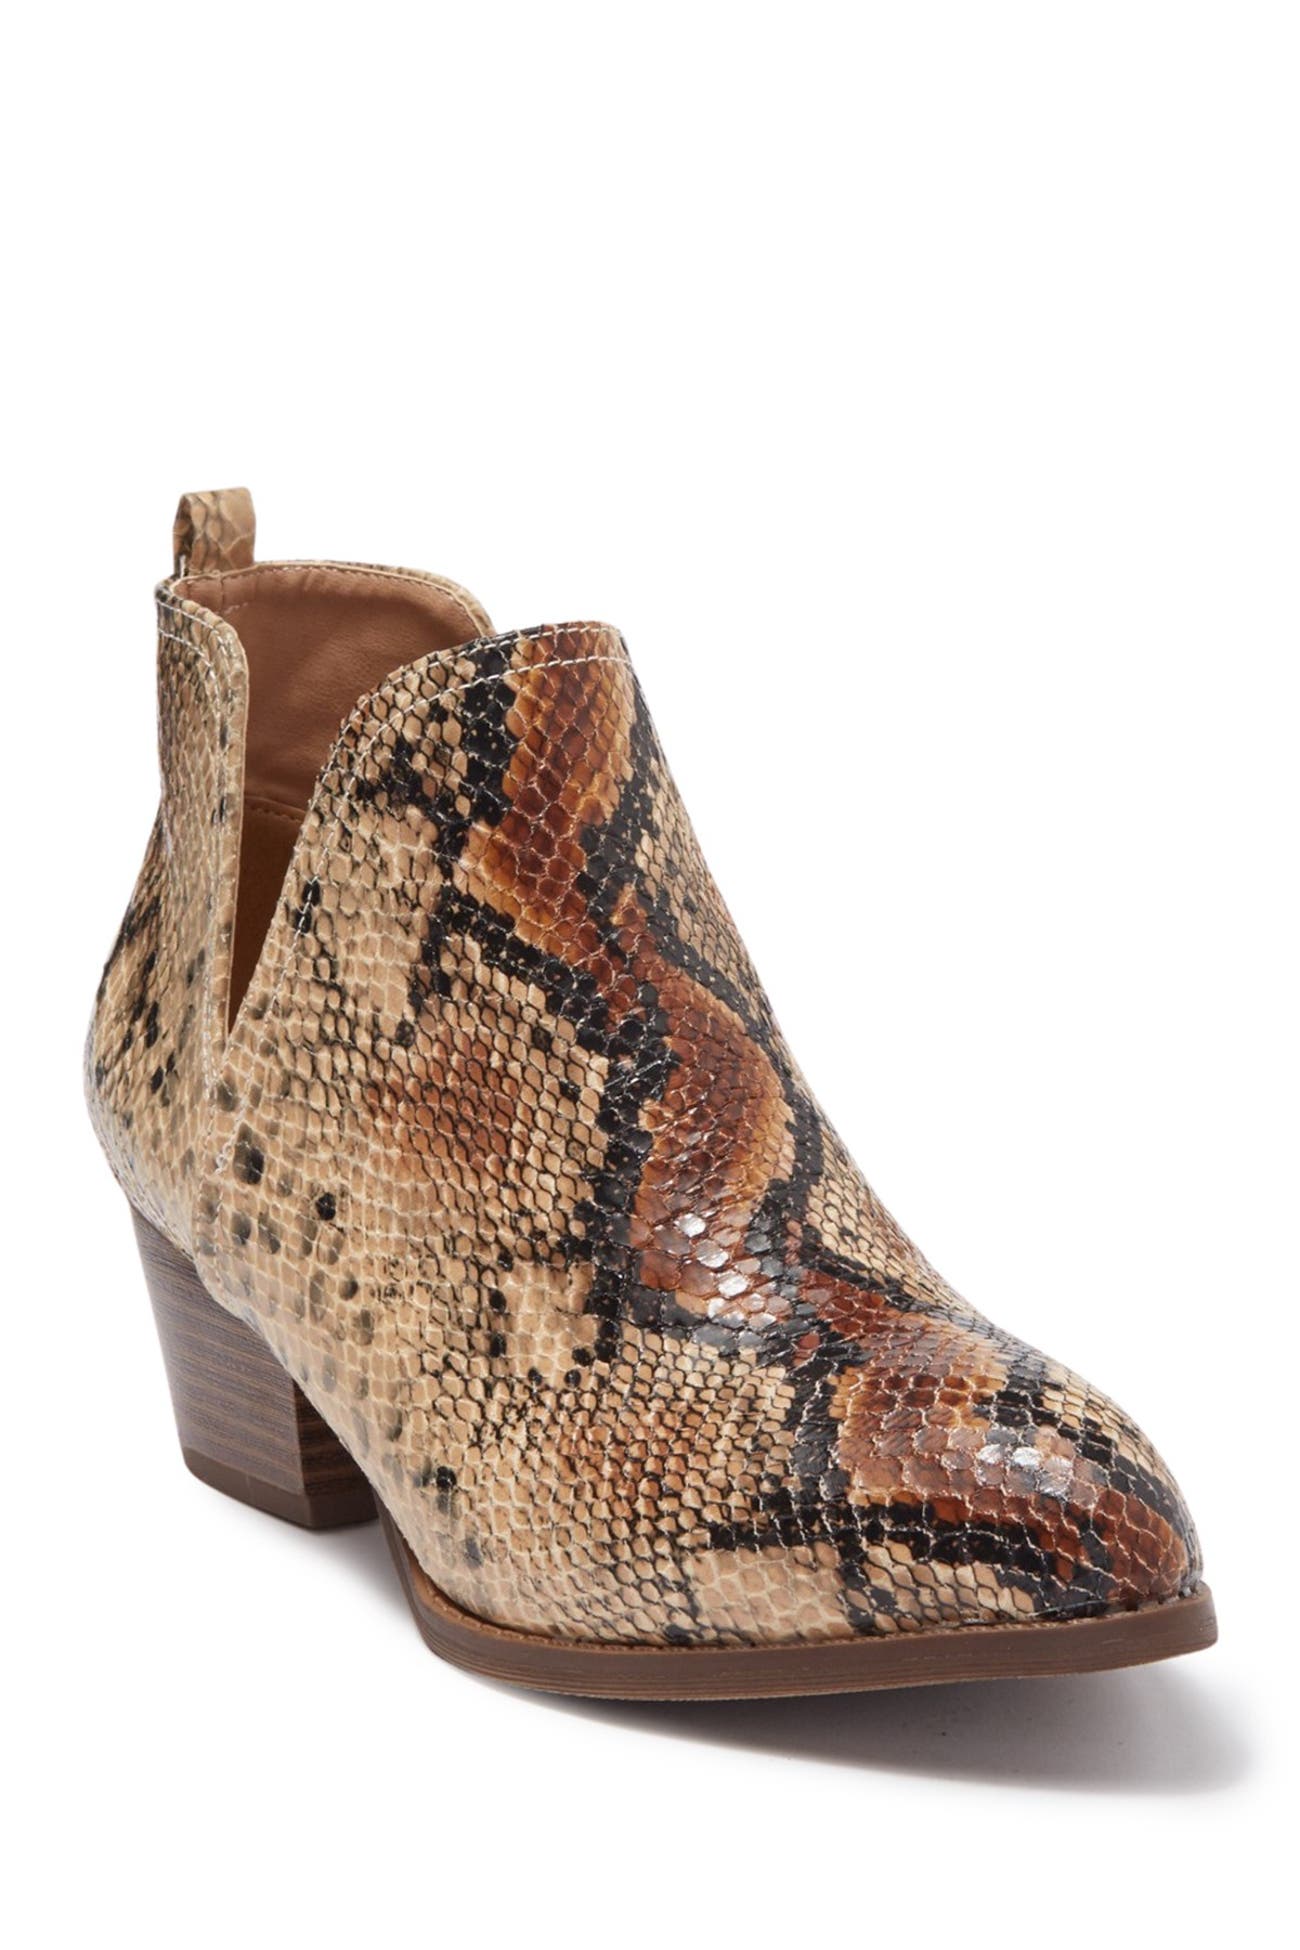 Chinese Laundry | Cortes Snakeskin Embossed Ankle Boot | Nordstrom Rack